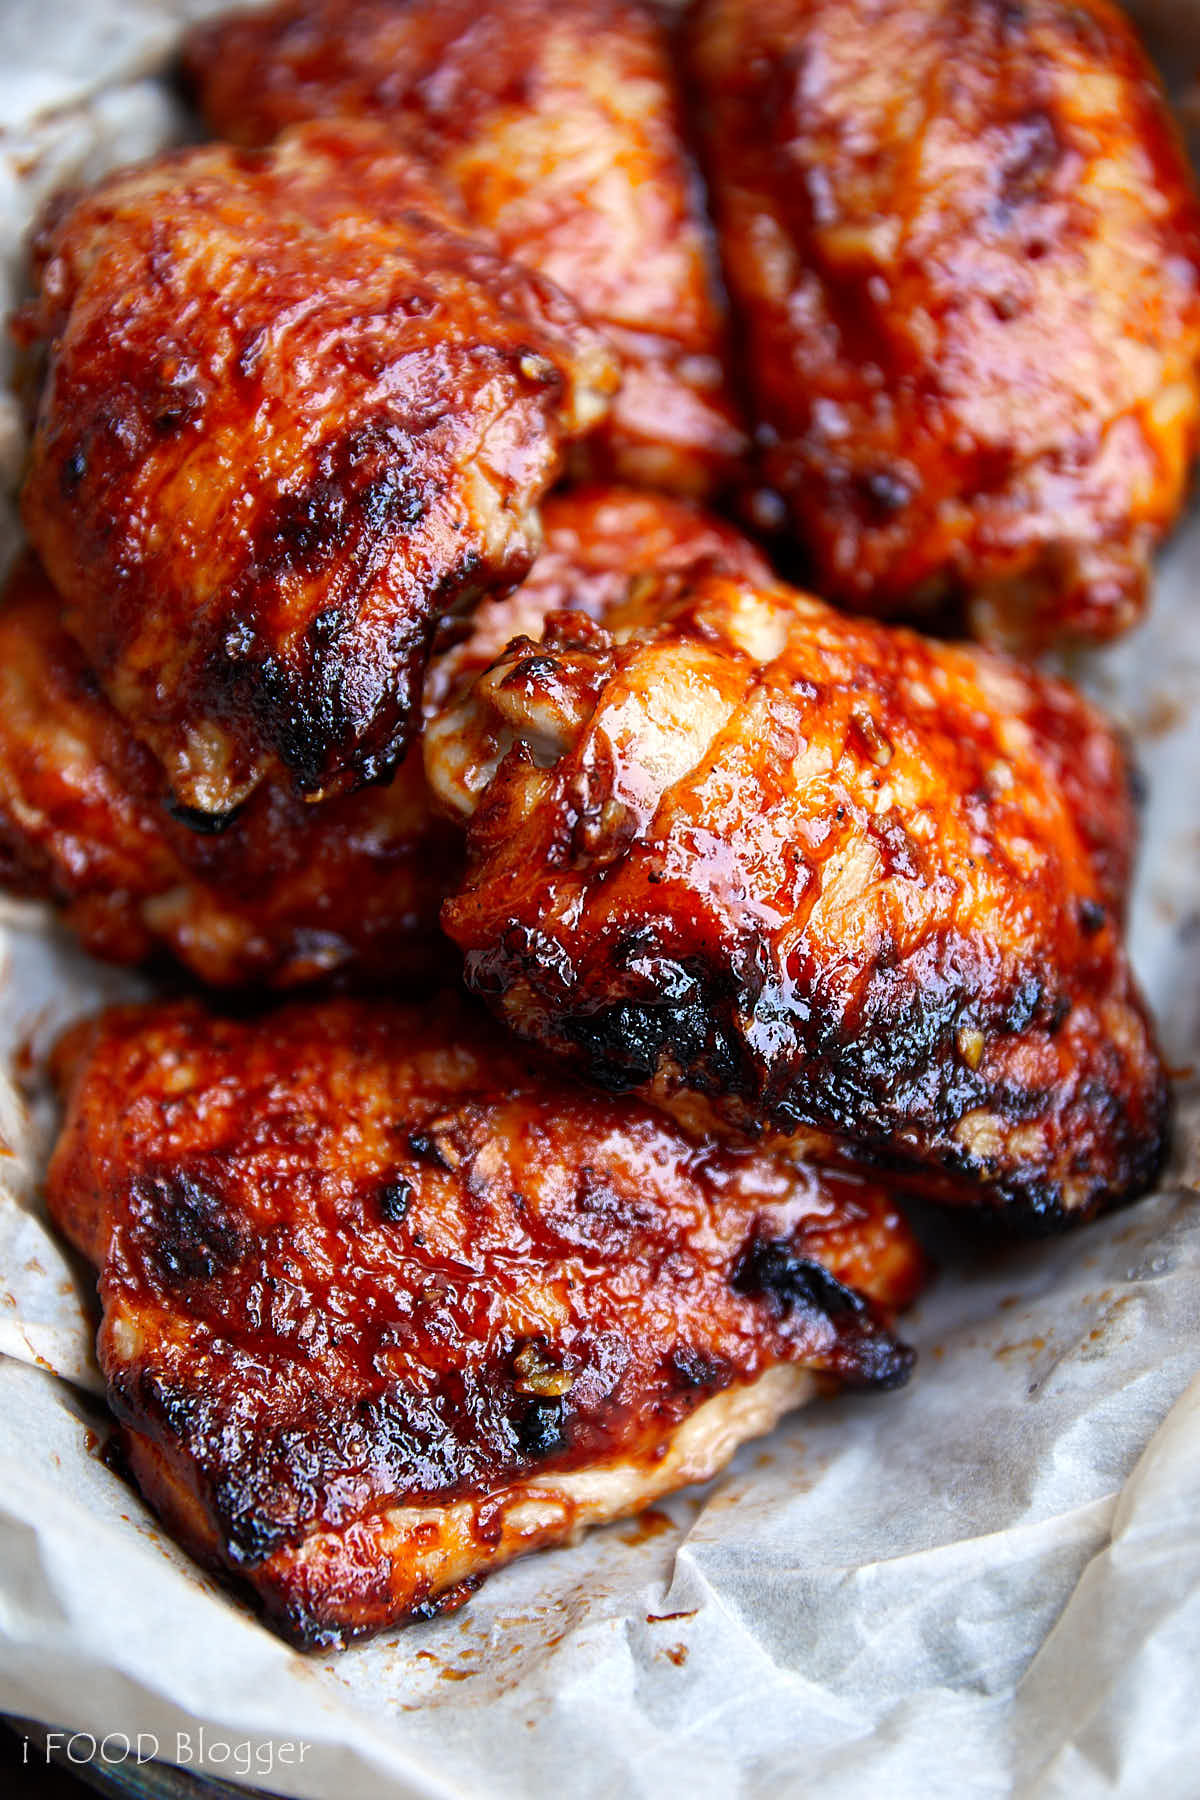 Baking Barbecue Chicken Thighs Luxury Baked Bbq Chicken Thighs Craving Tasty